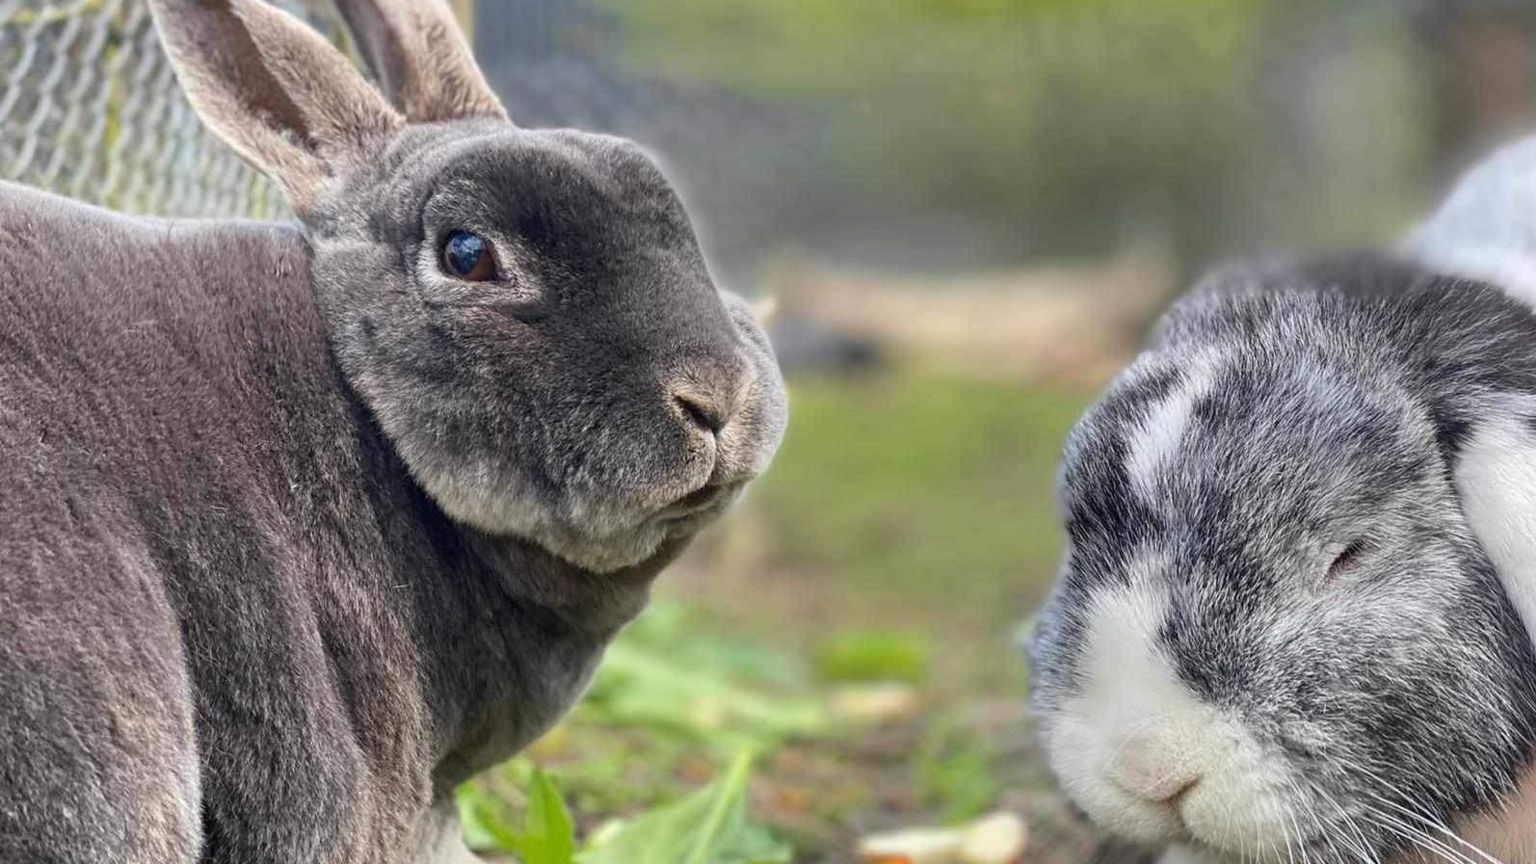 A close up picture of two rabbits 